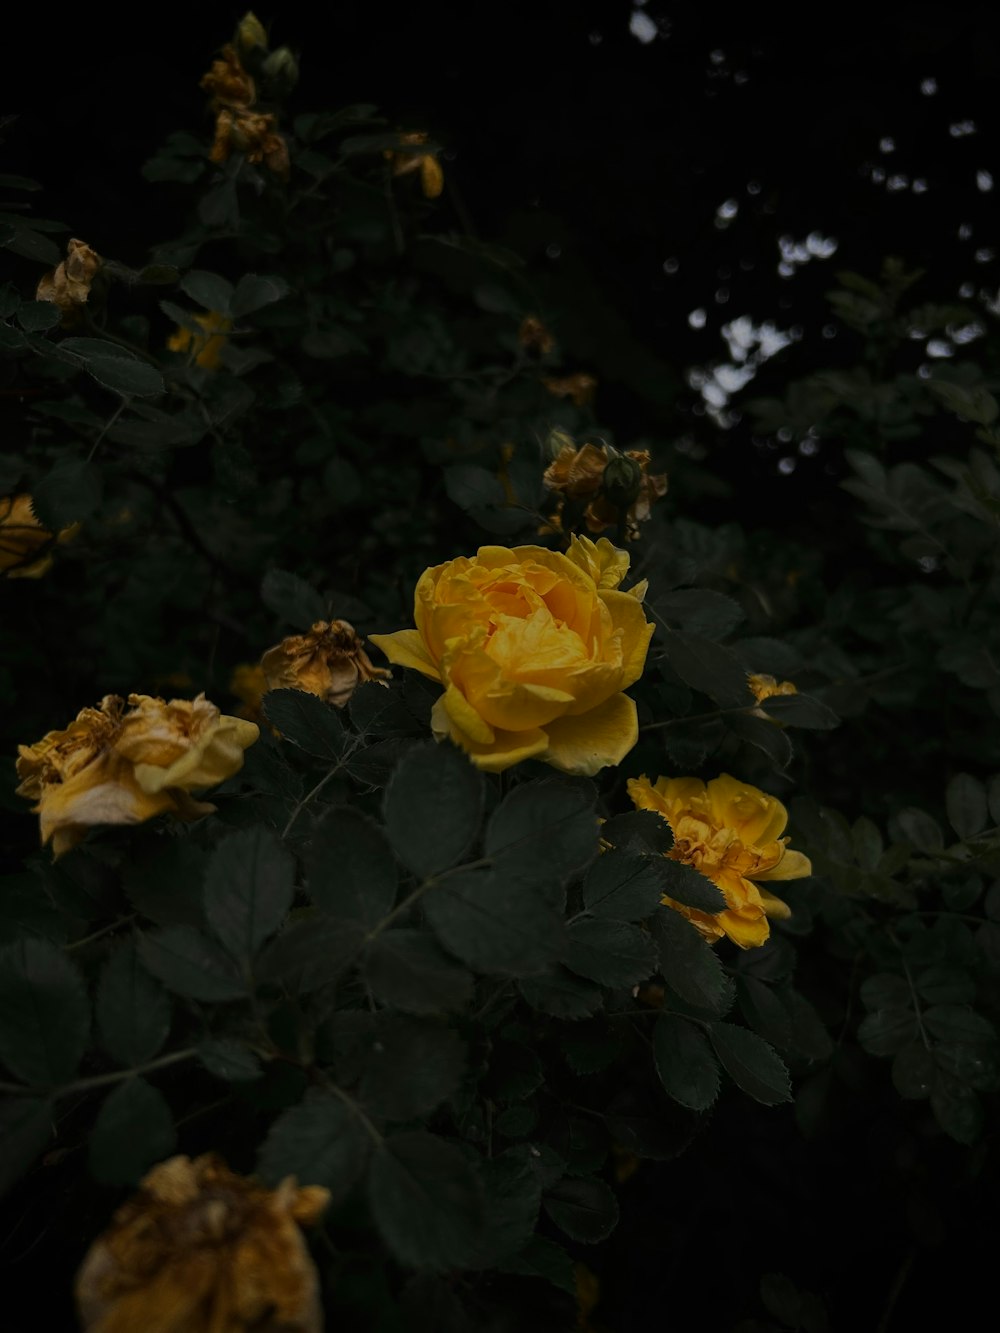 a yellow rose is blooming in the dark